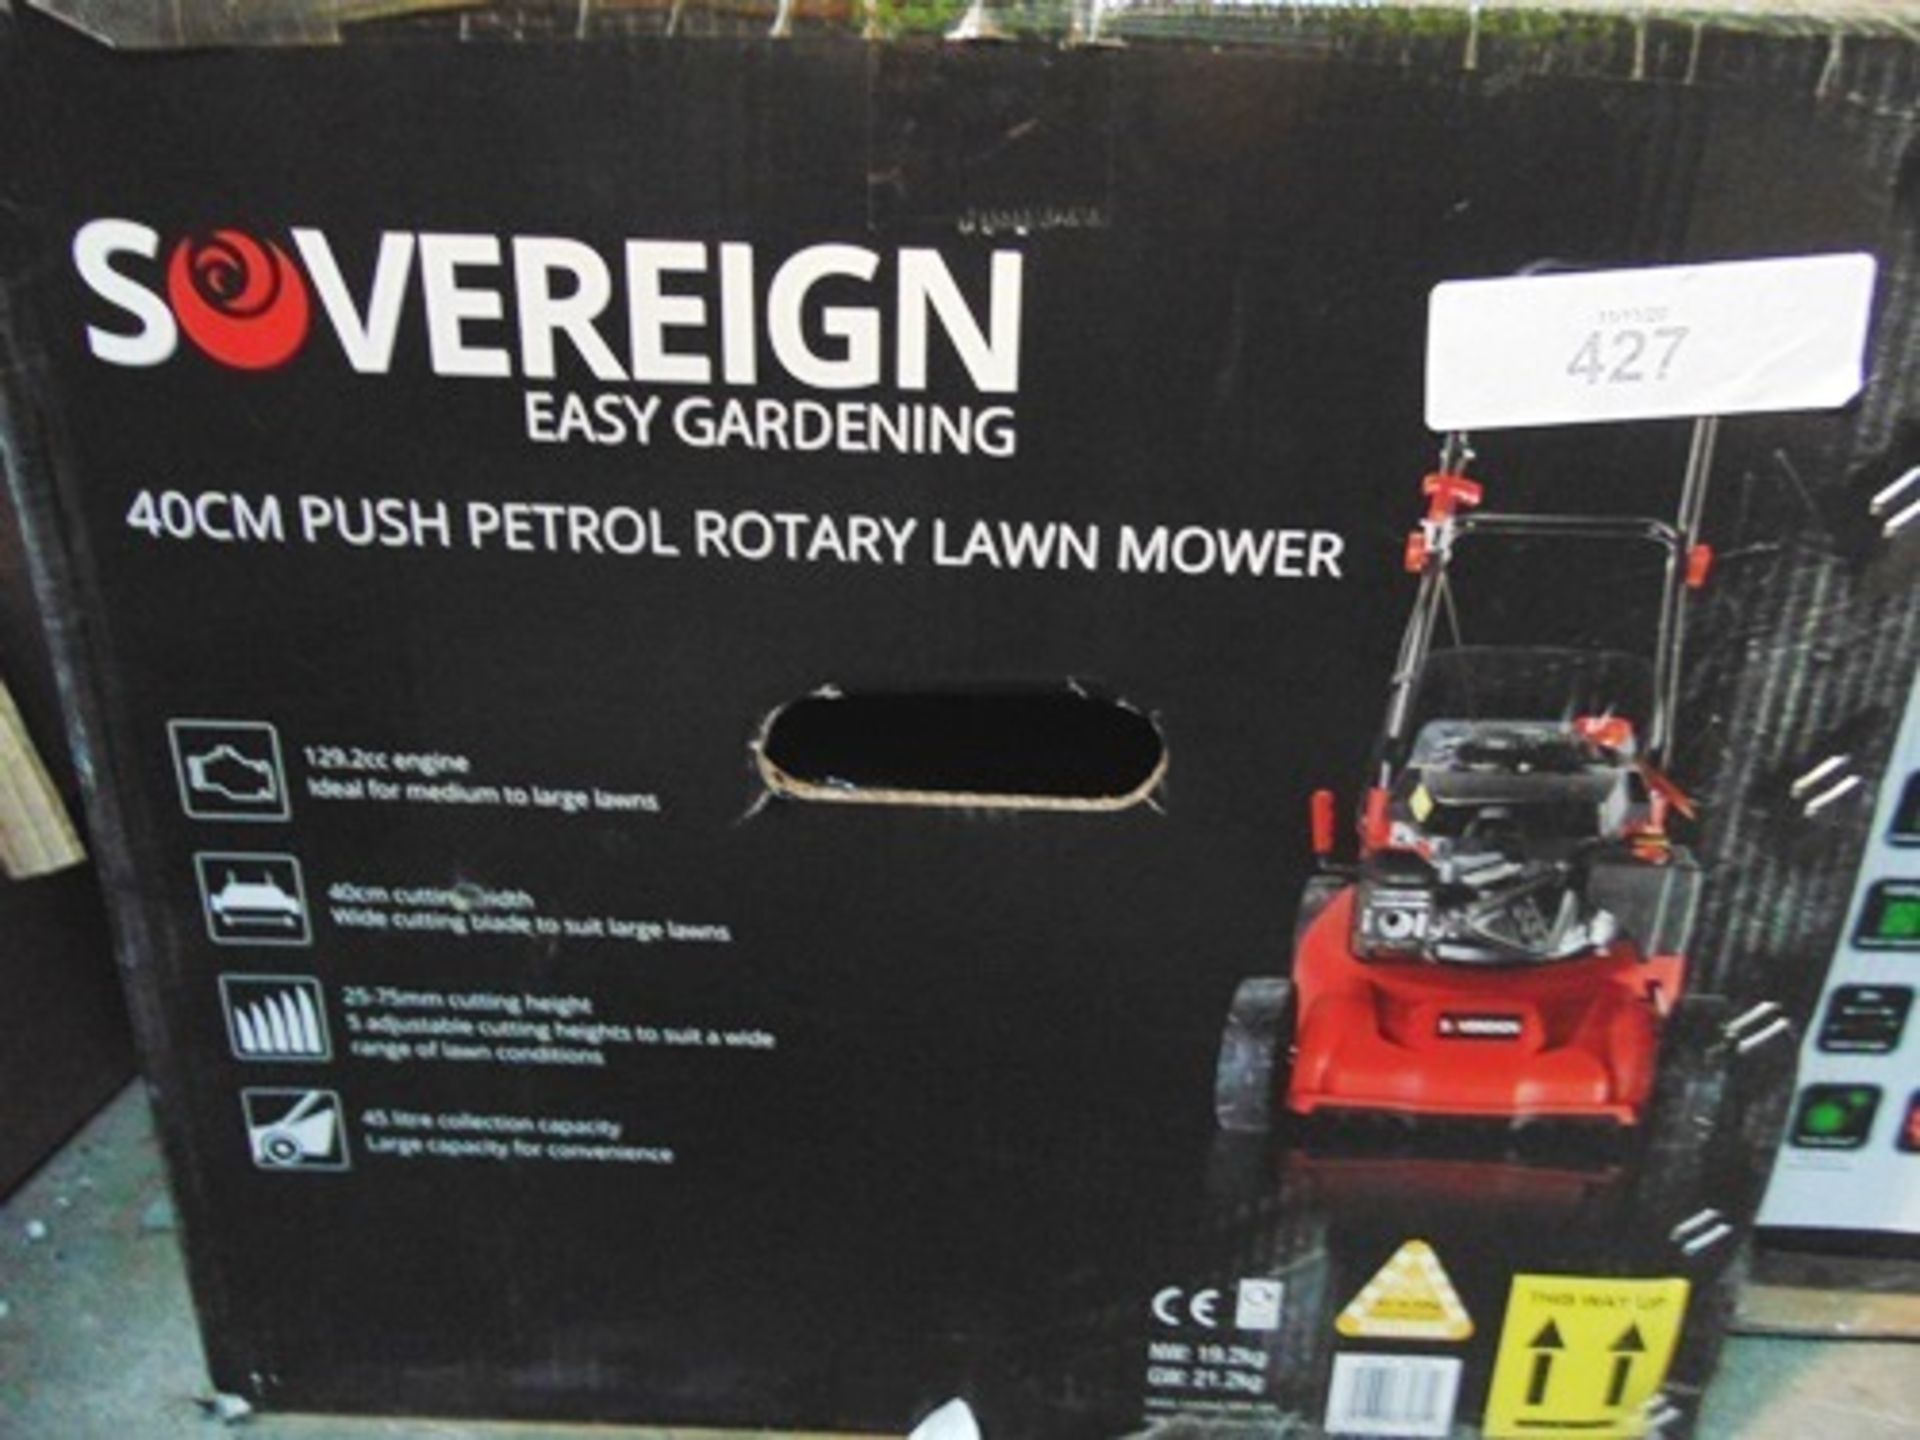 A Sovereign 40cm push petrol rotary lawnmower, together with a Sovereign 32cm 1000W push electric